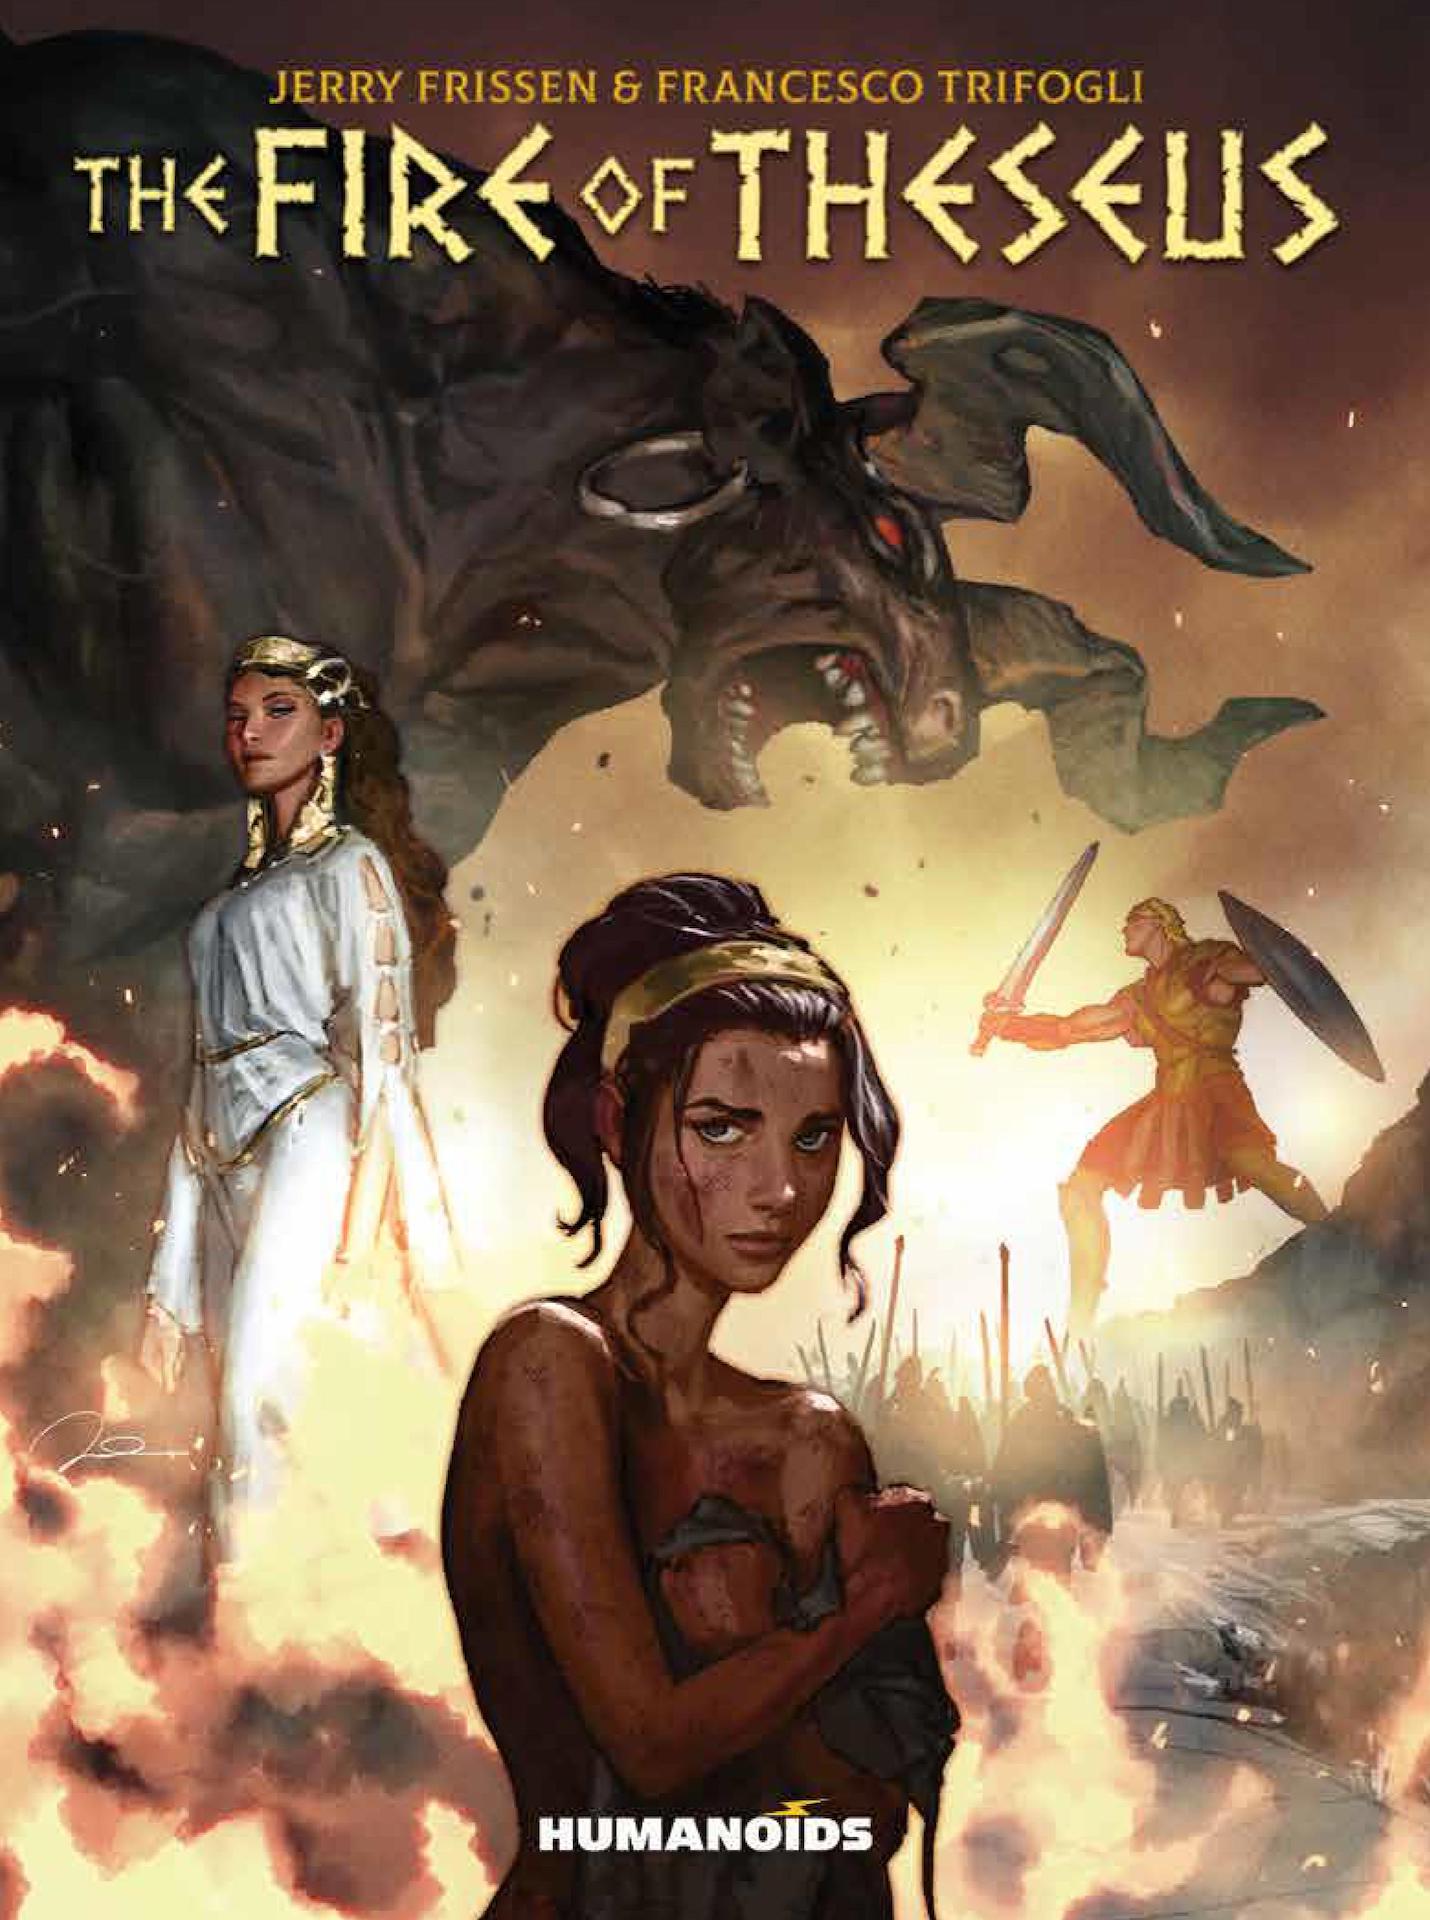 EXCLUSIVE Humanoids Preview: Fire of Theseus